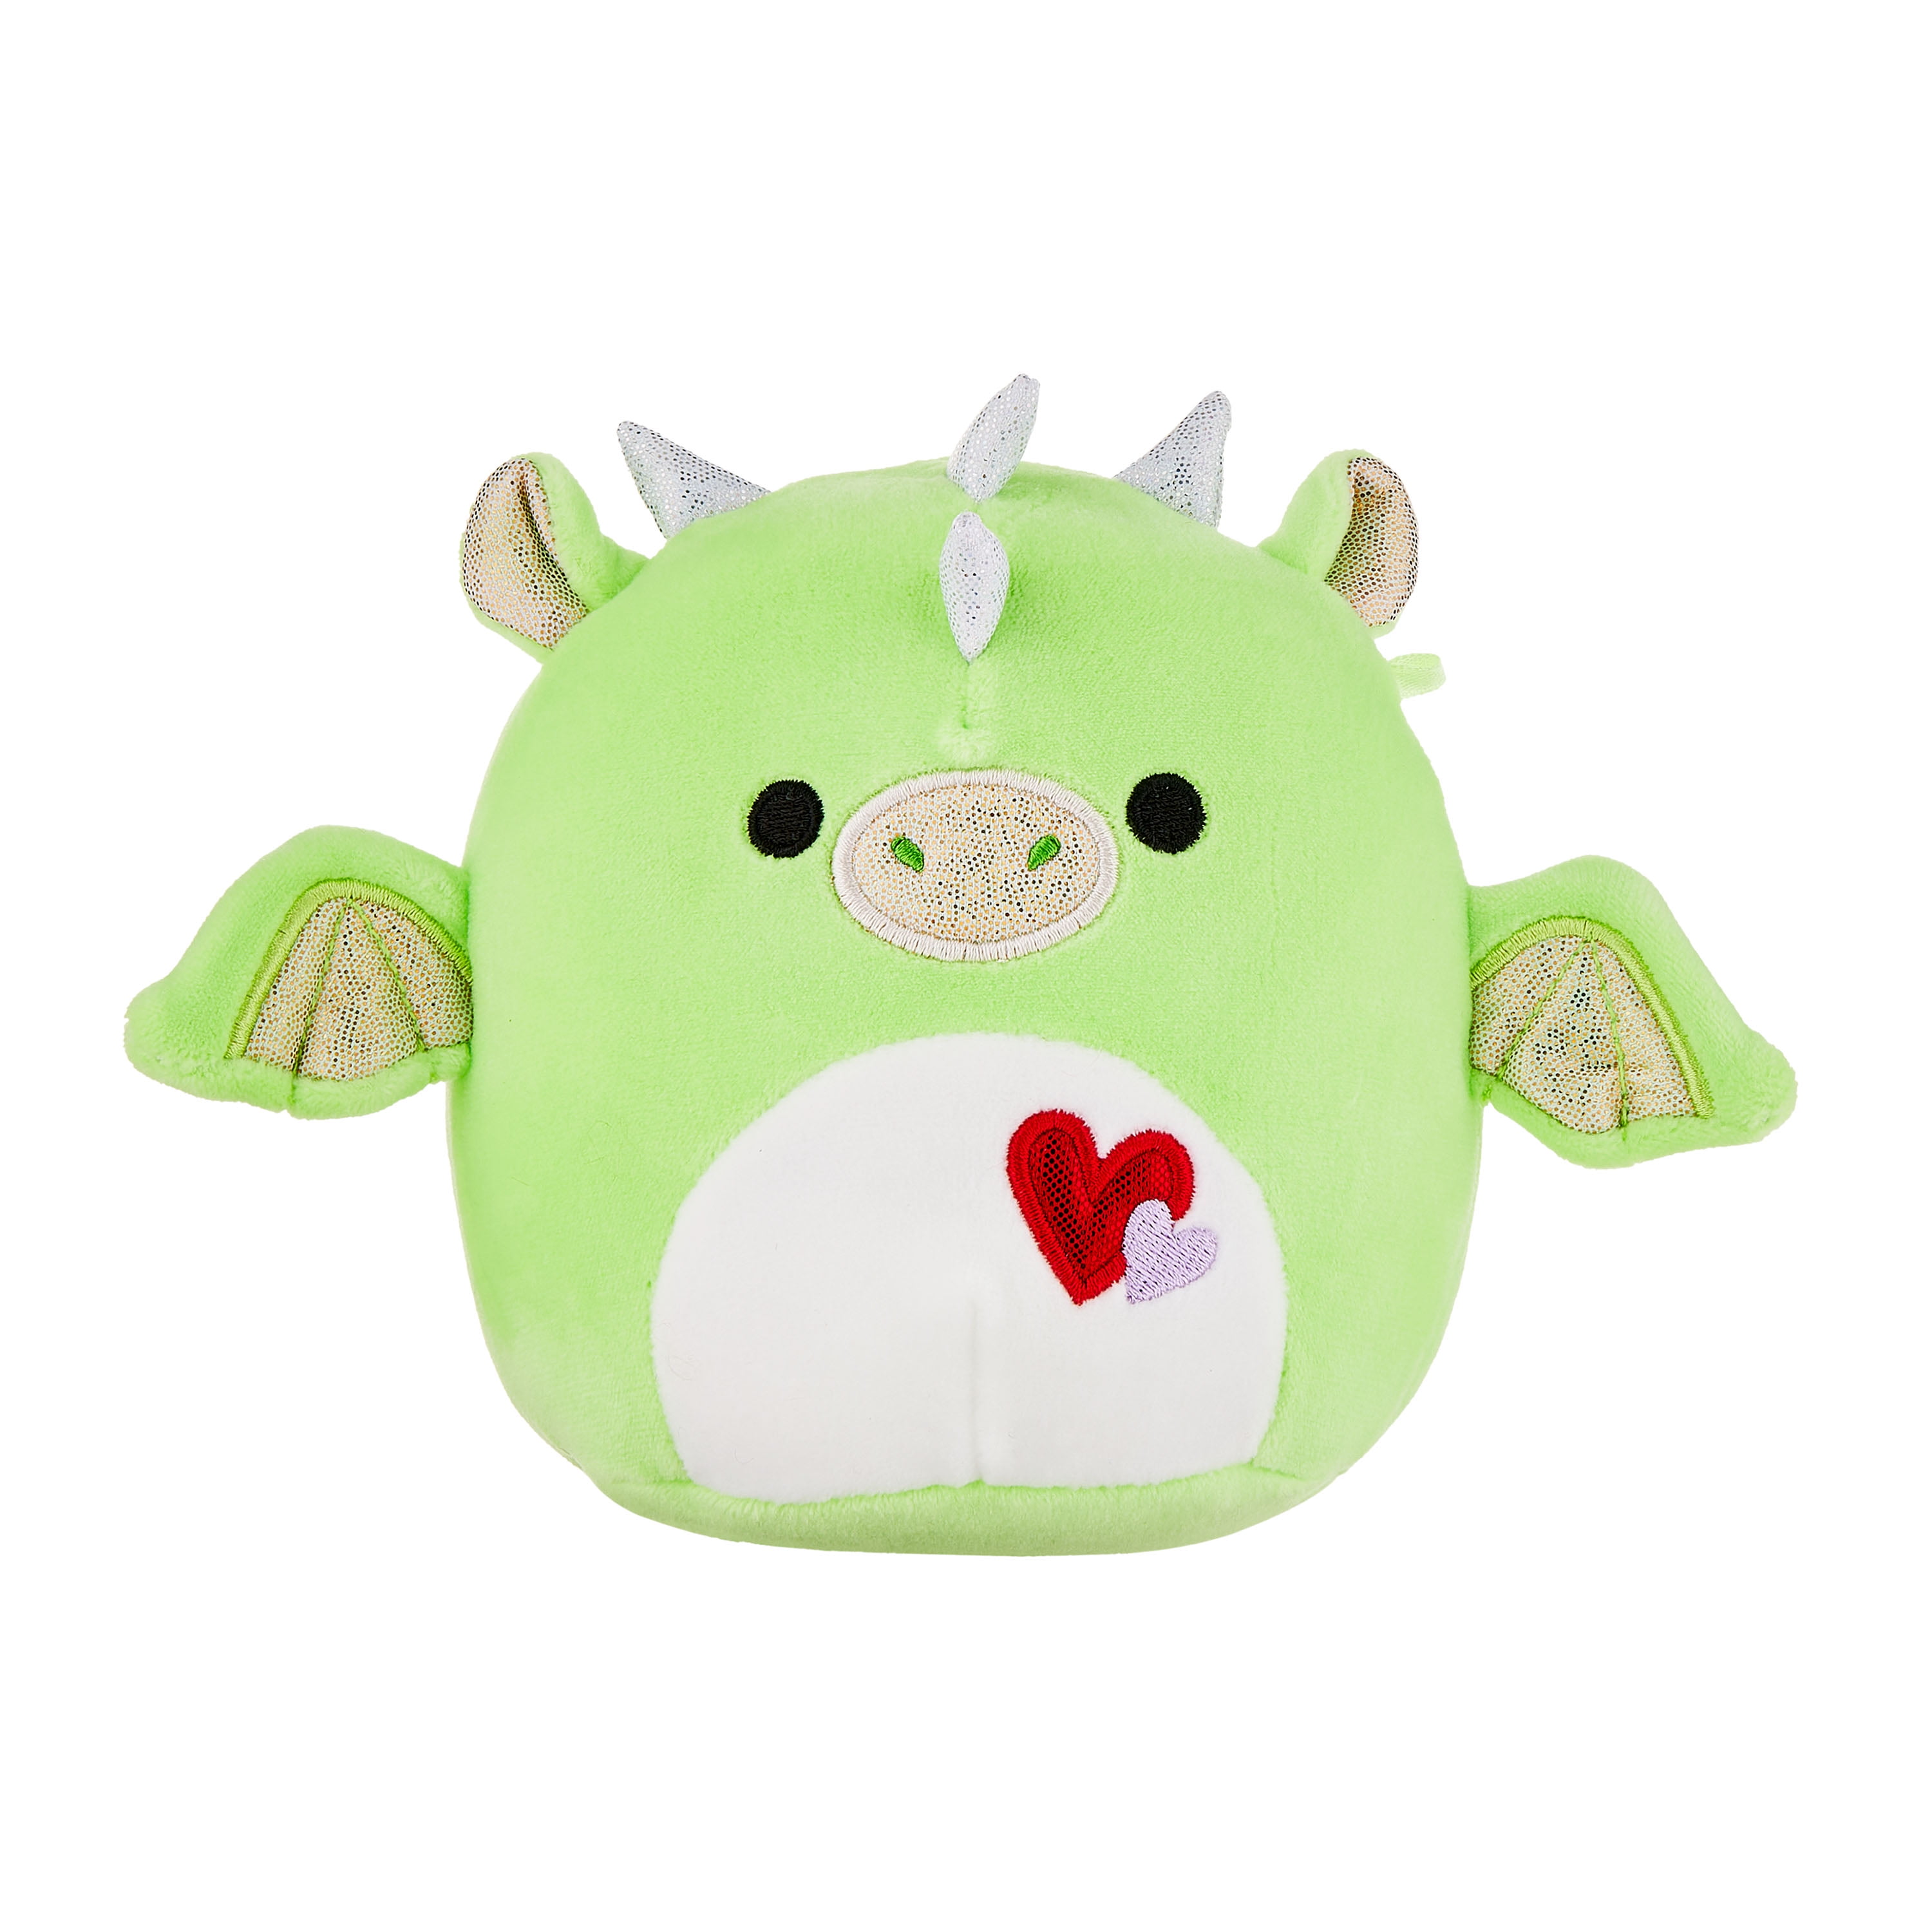 Squishmallows Official Plush 5 inch Green Dragon - Child's Ultra